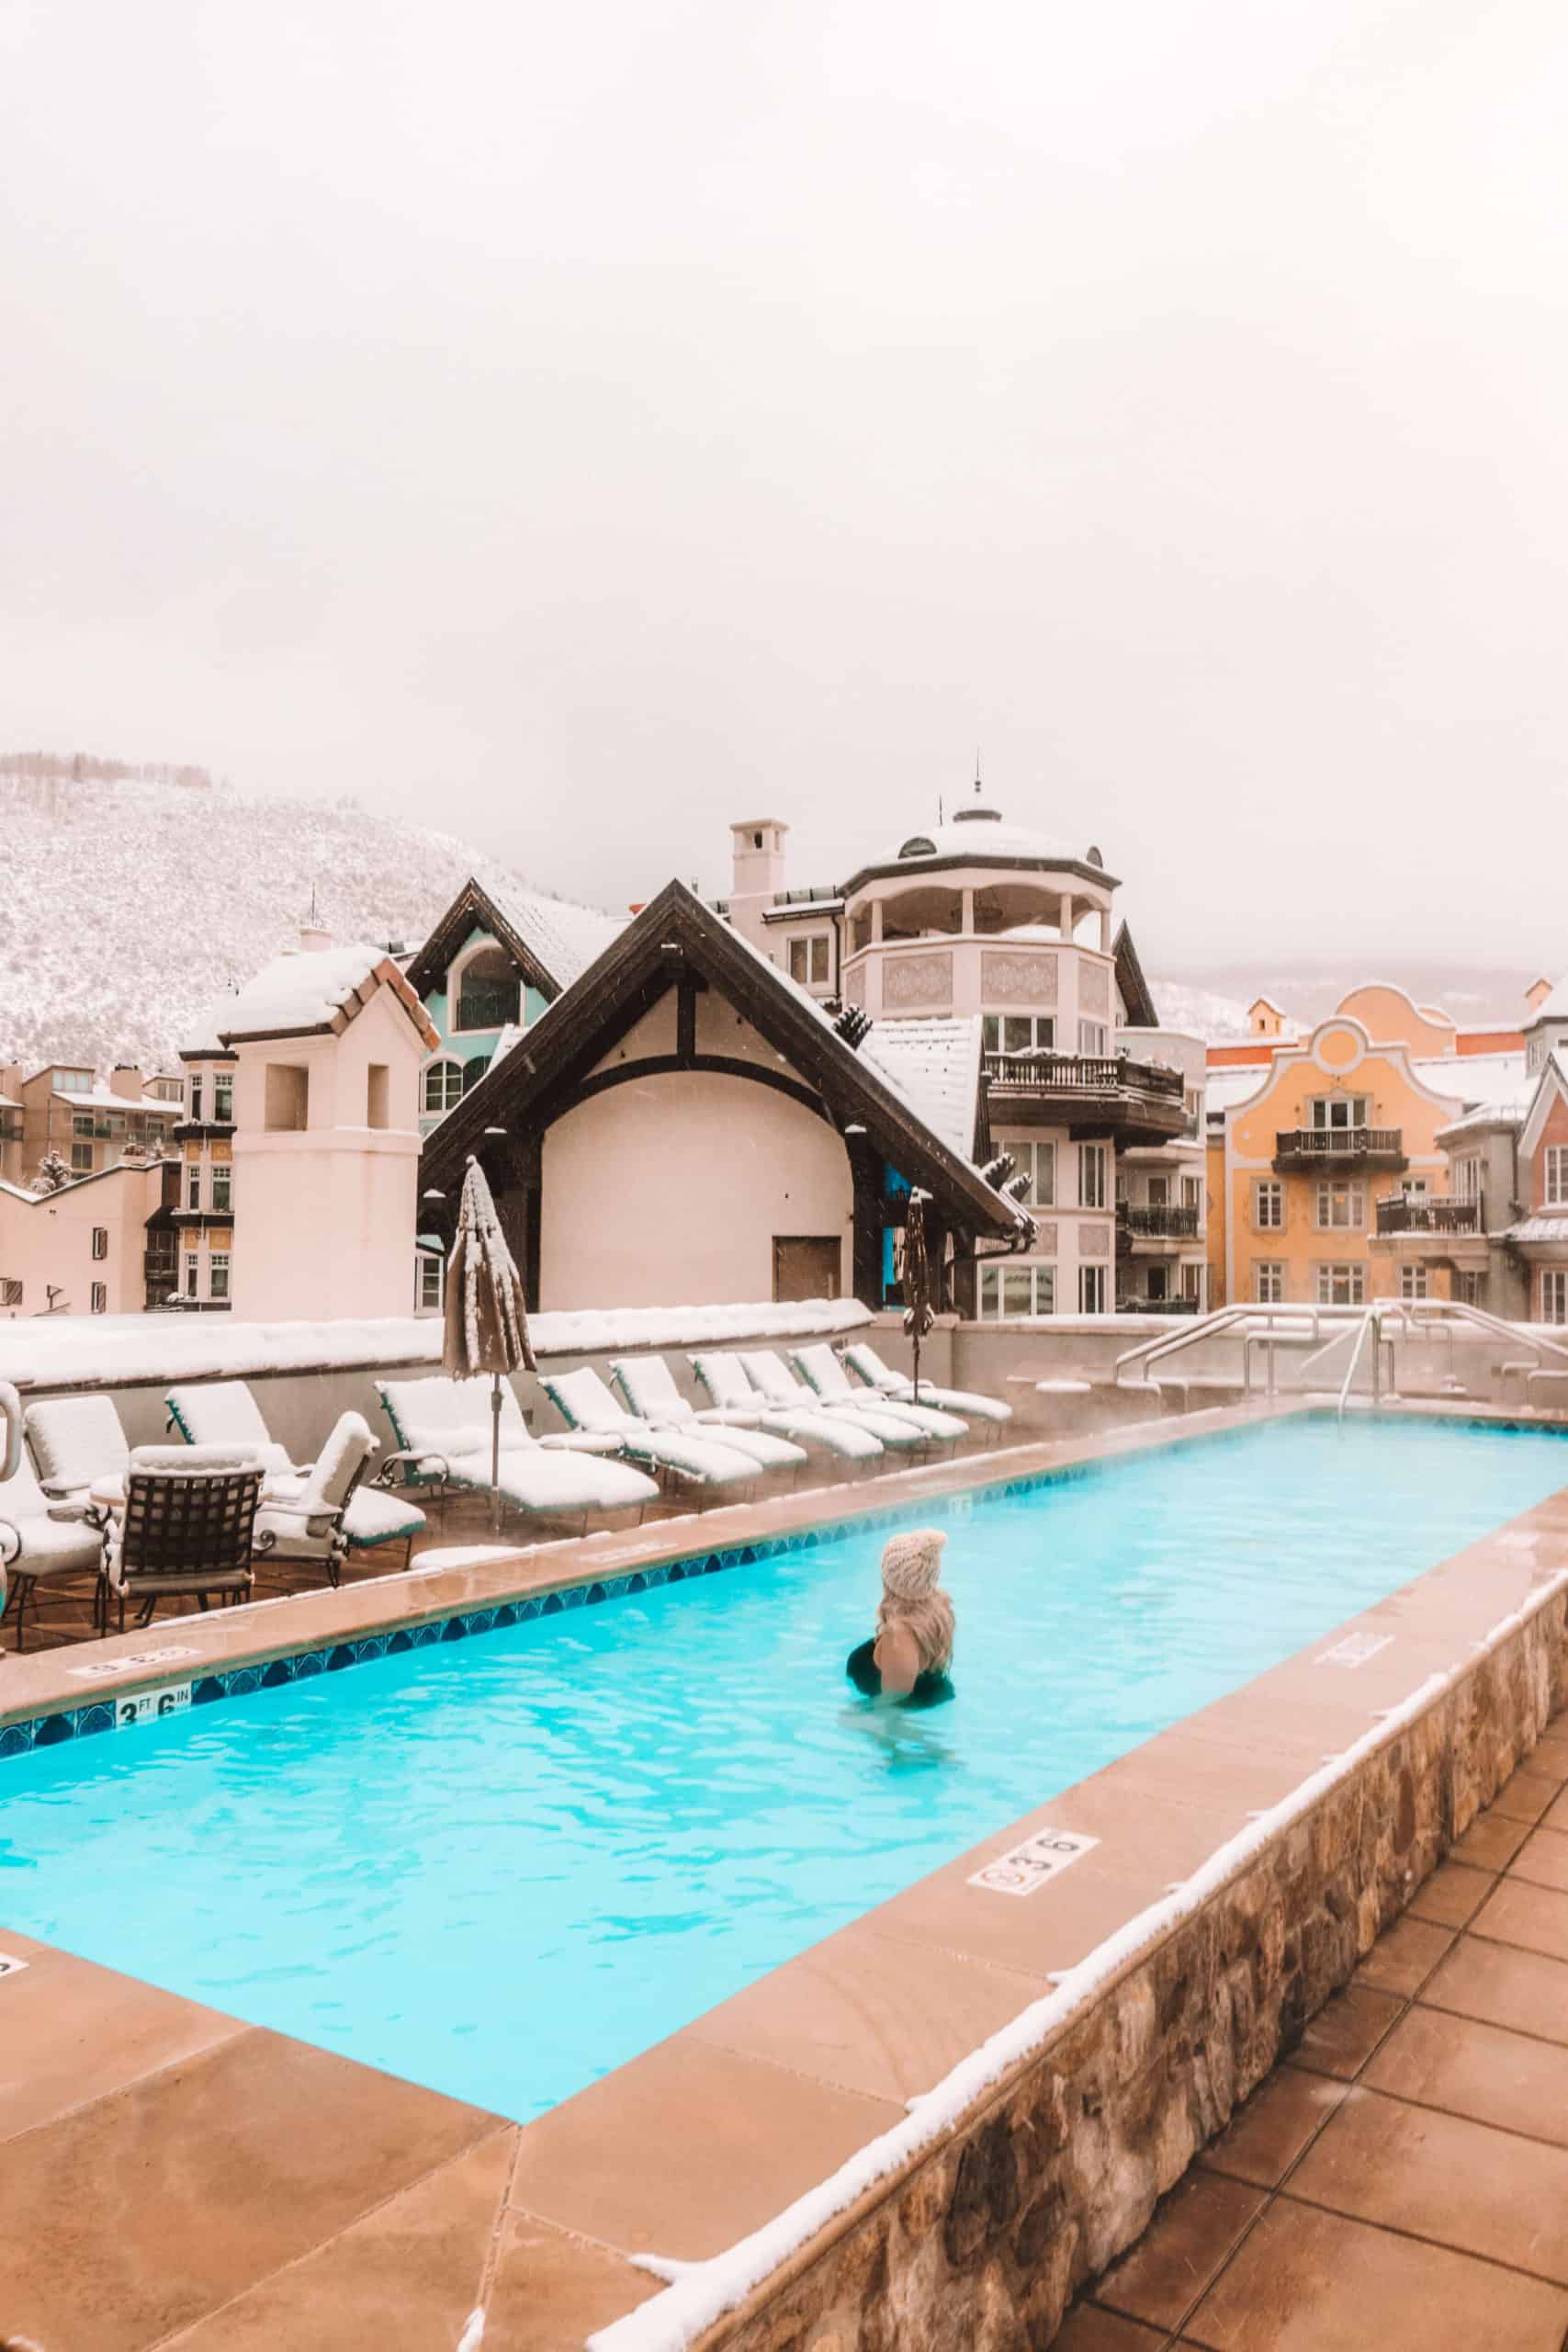 Heated pool at the Arrabelle hotel | The Ultimate Guide to Vail, Colorado